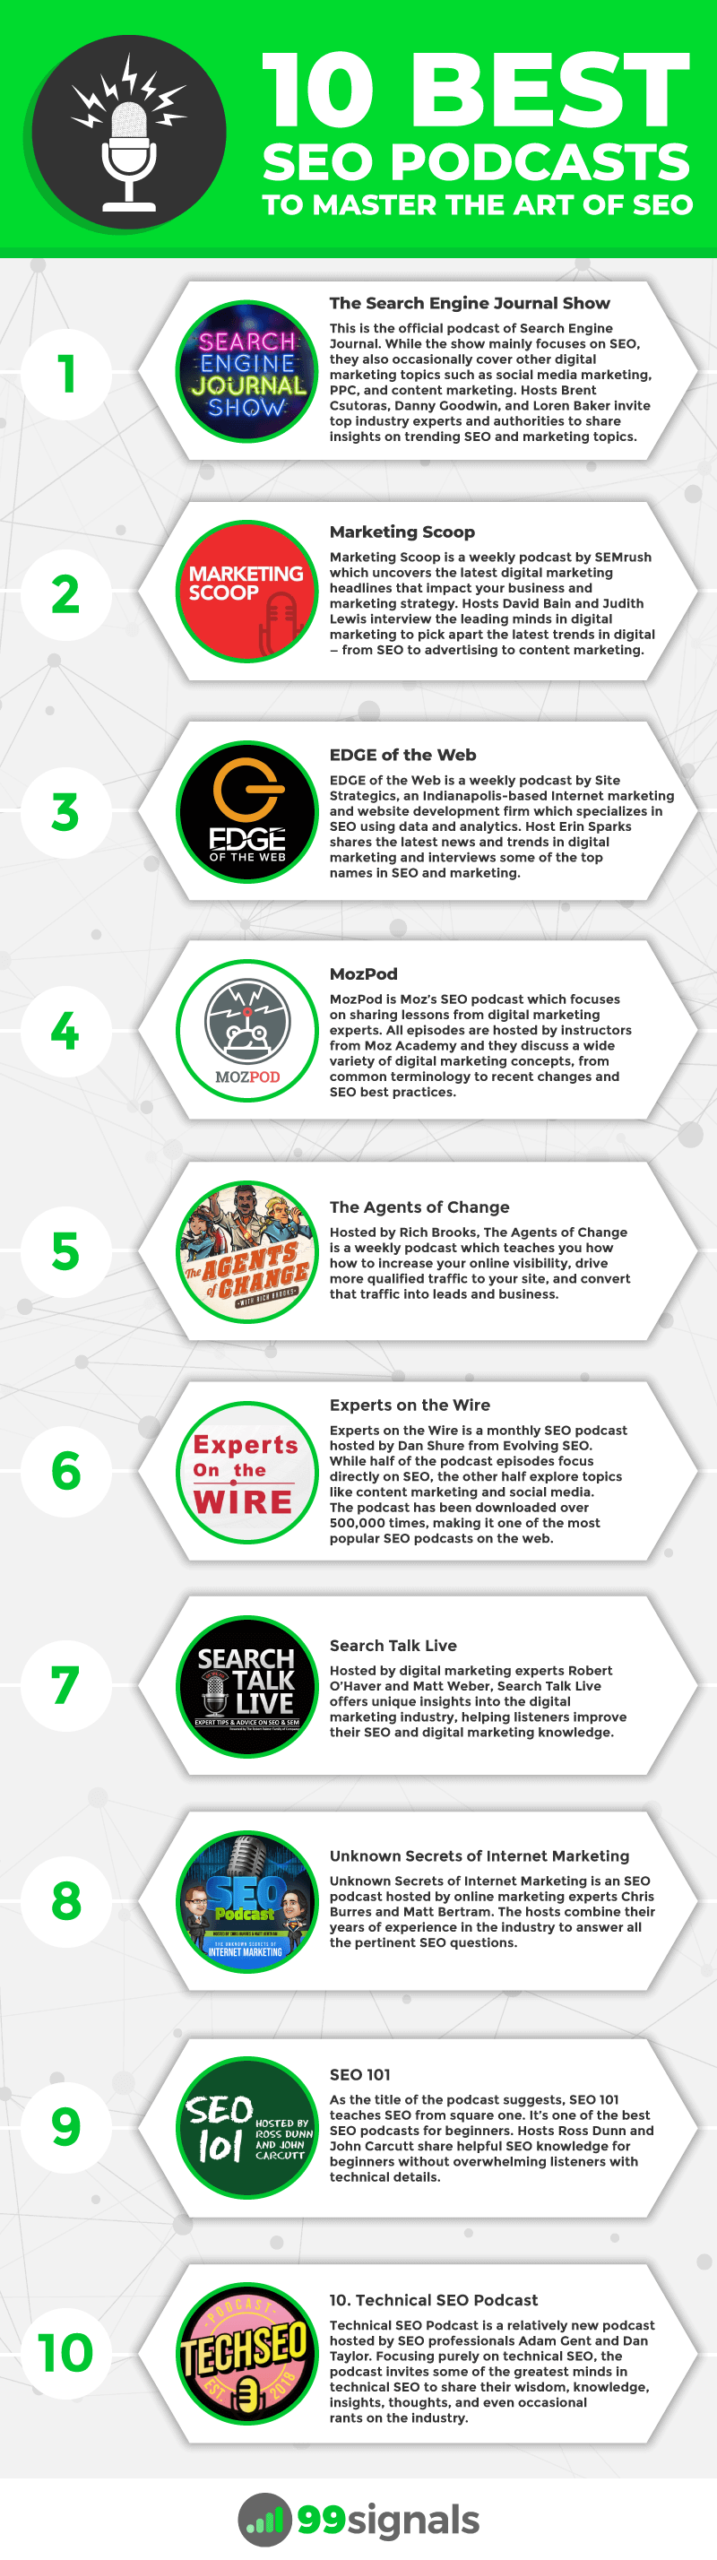  10 Best SEO Podcasts to Master the Art of SEO #infographic